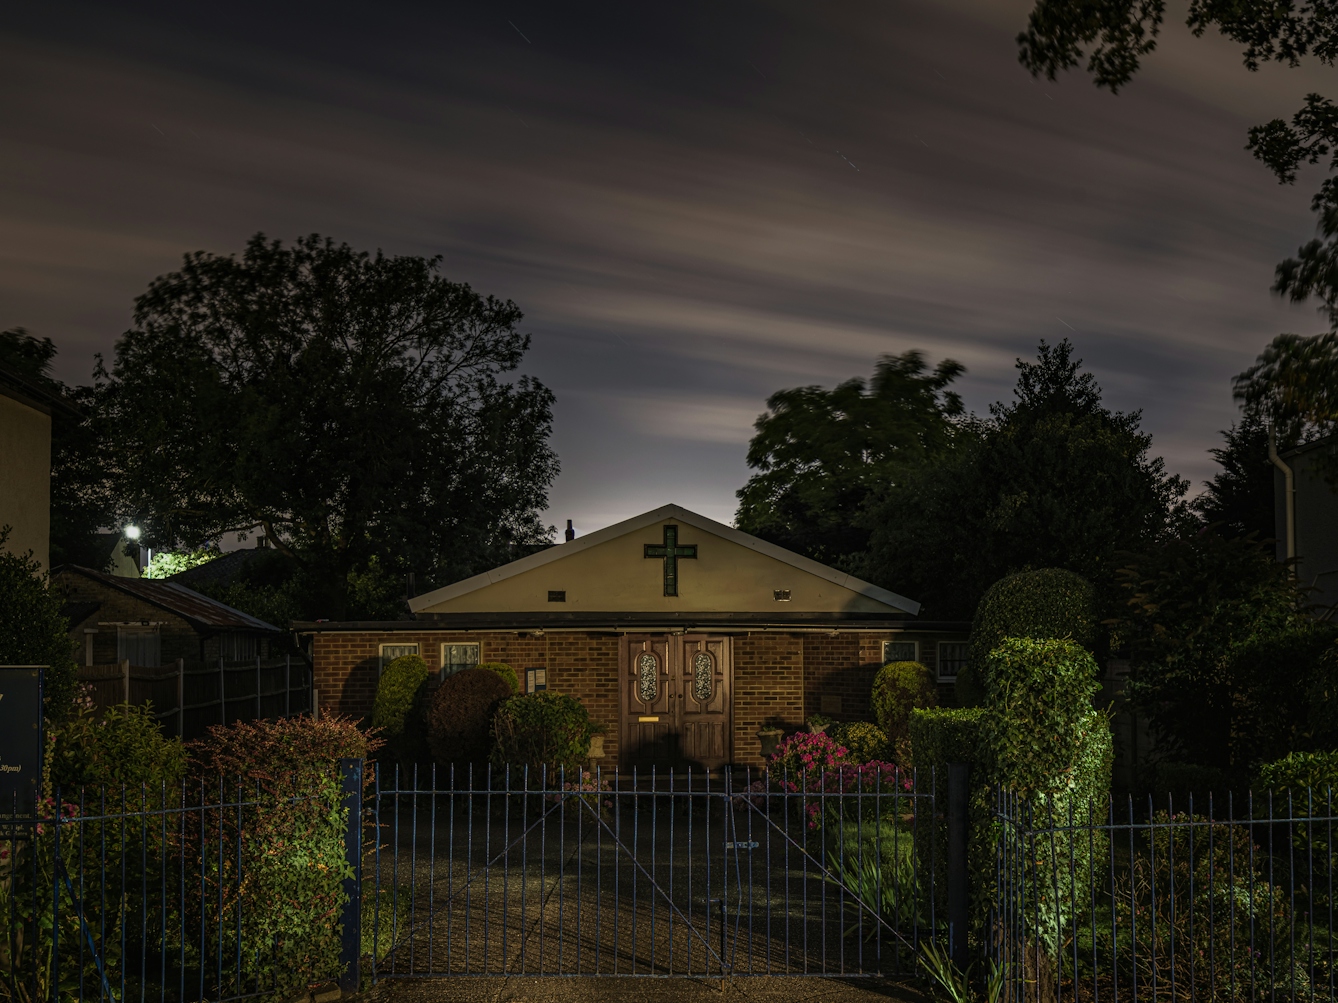 Photograph of Light on the Hill Spiritual Sanctuary, Dartford, captured at night.  The building has a pitched roof with a cross at the apex and doublers wooden doors.  The building is detached and surrounded by foliage, with a blue metal gate in the foreground.